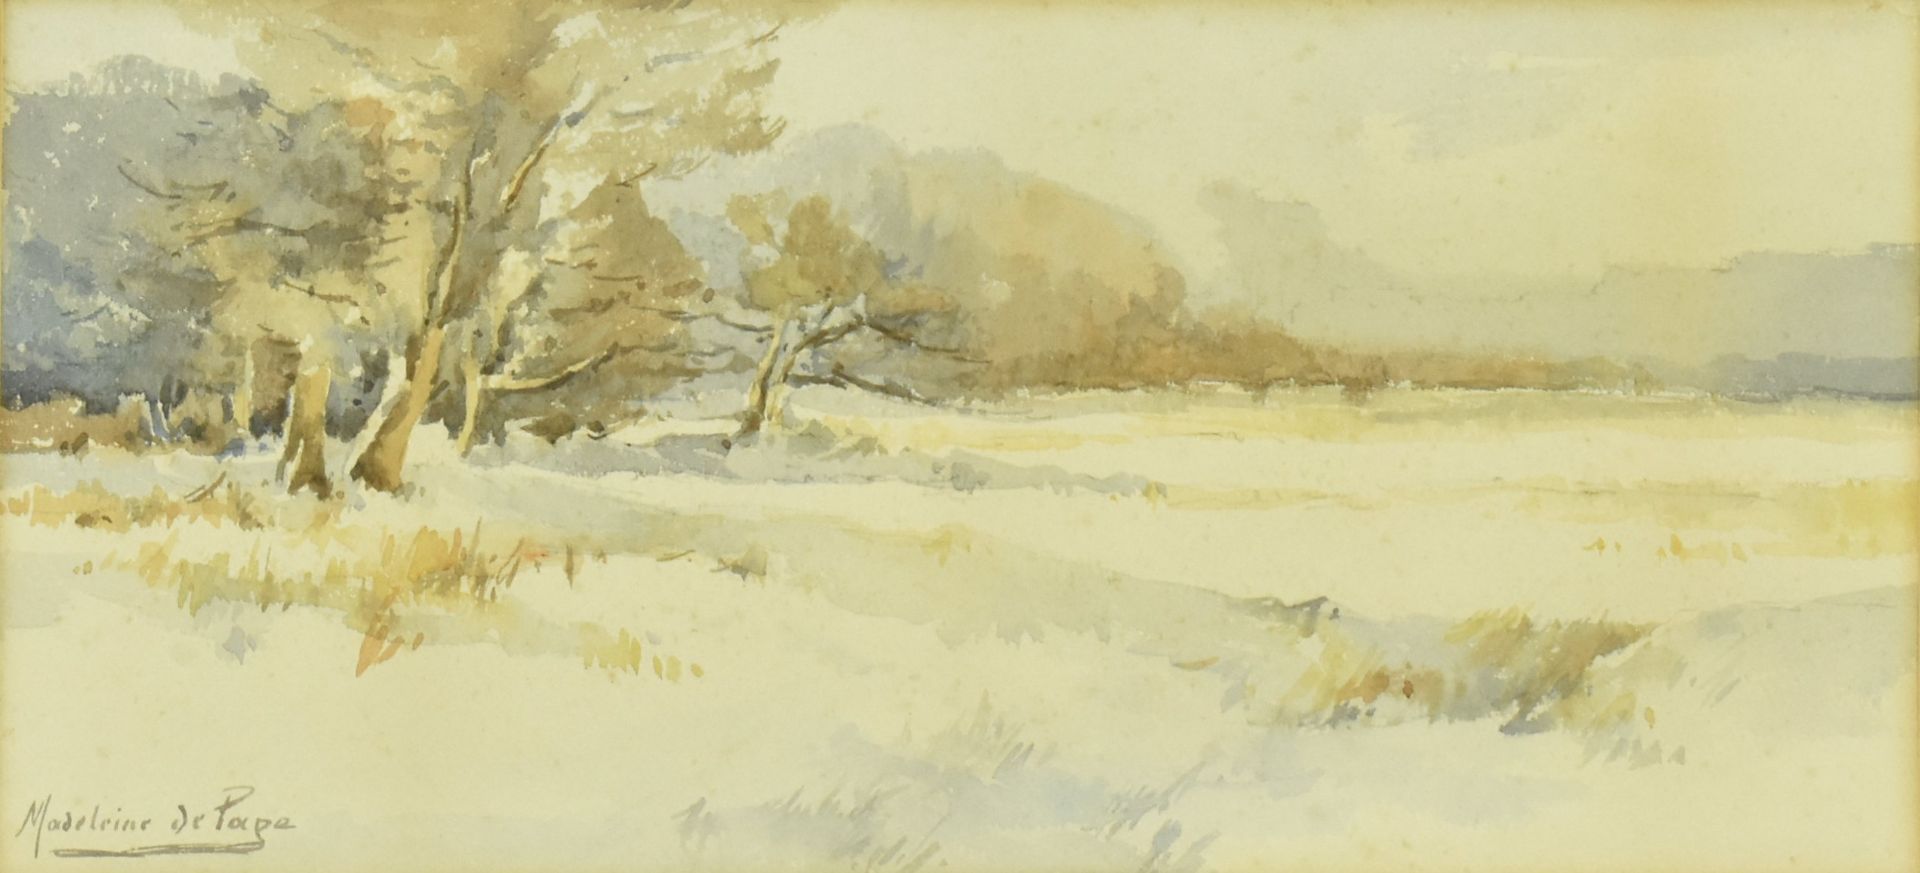 MADELEINE MARIE SOPHIE DE PAPE (B.1883) - PAIR OF WATERCOLOURS - Image 4 of 8